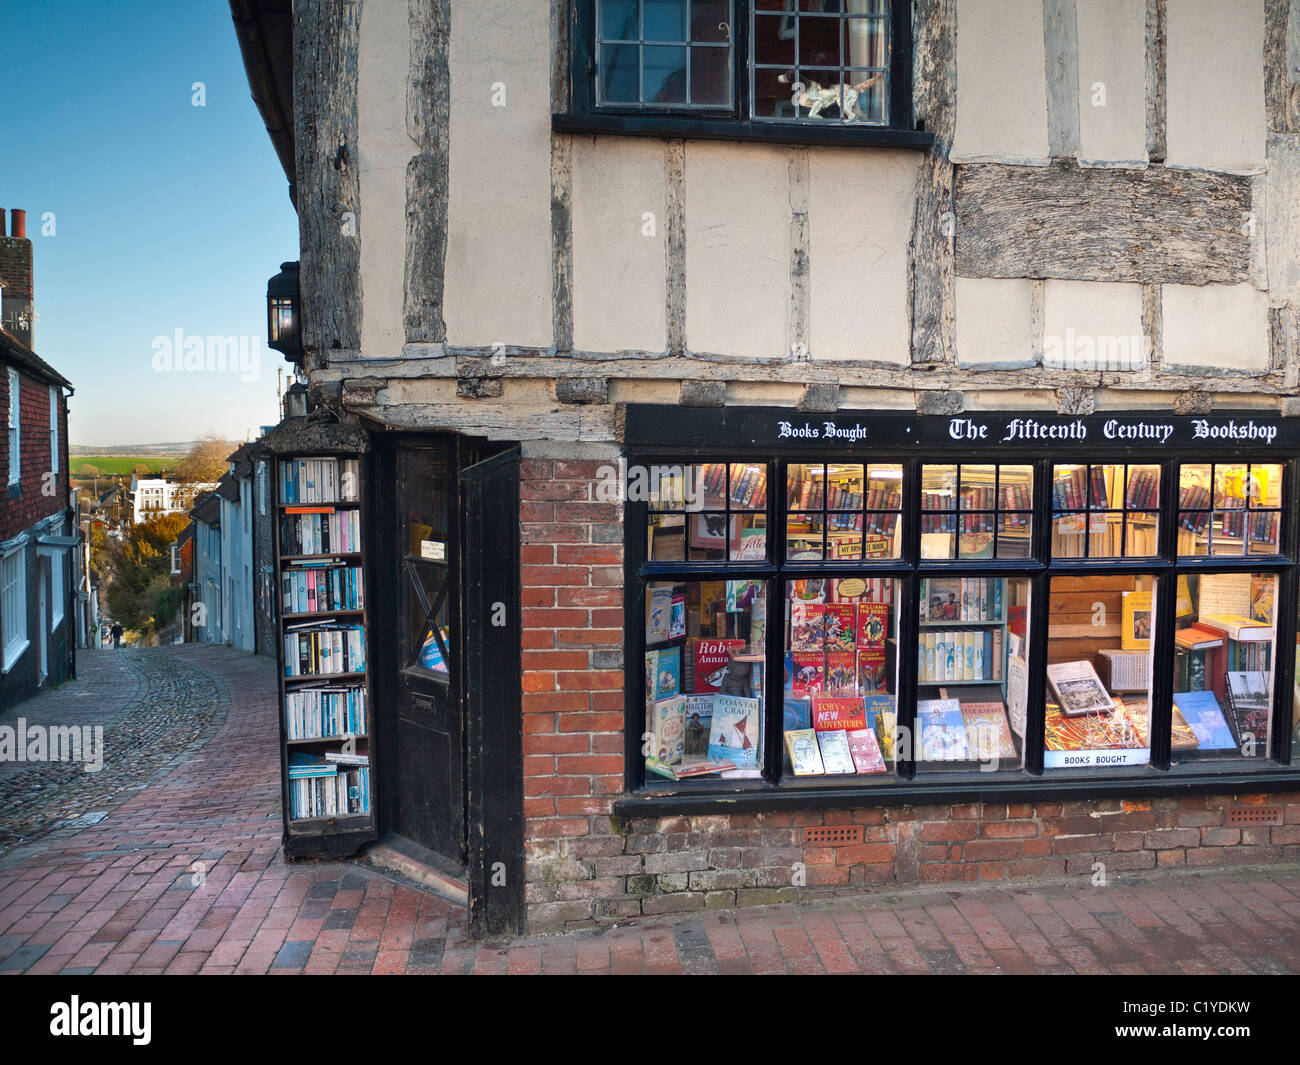 BOOK SHOP STORE antiquarian 15th century book shop  Lewes High Street East Sussex UK Stock Photo